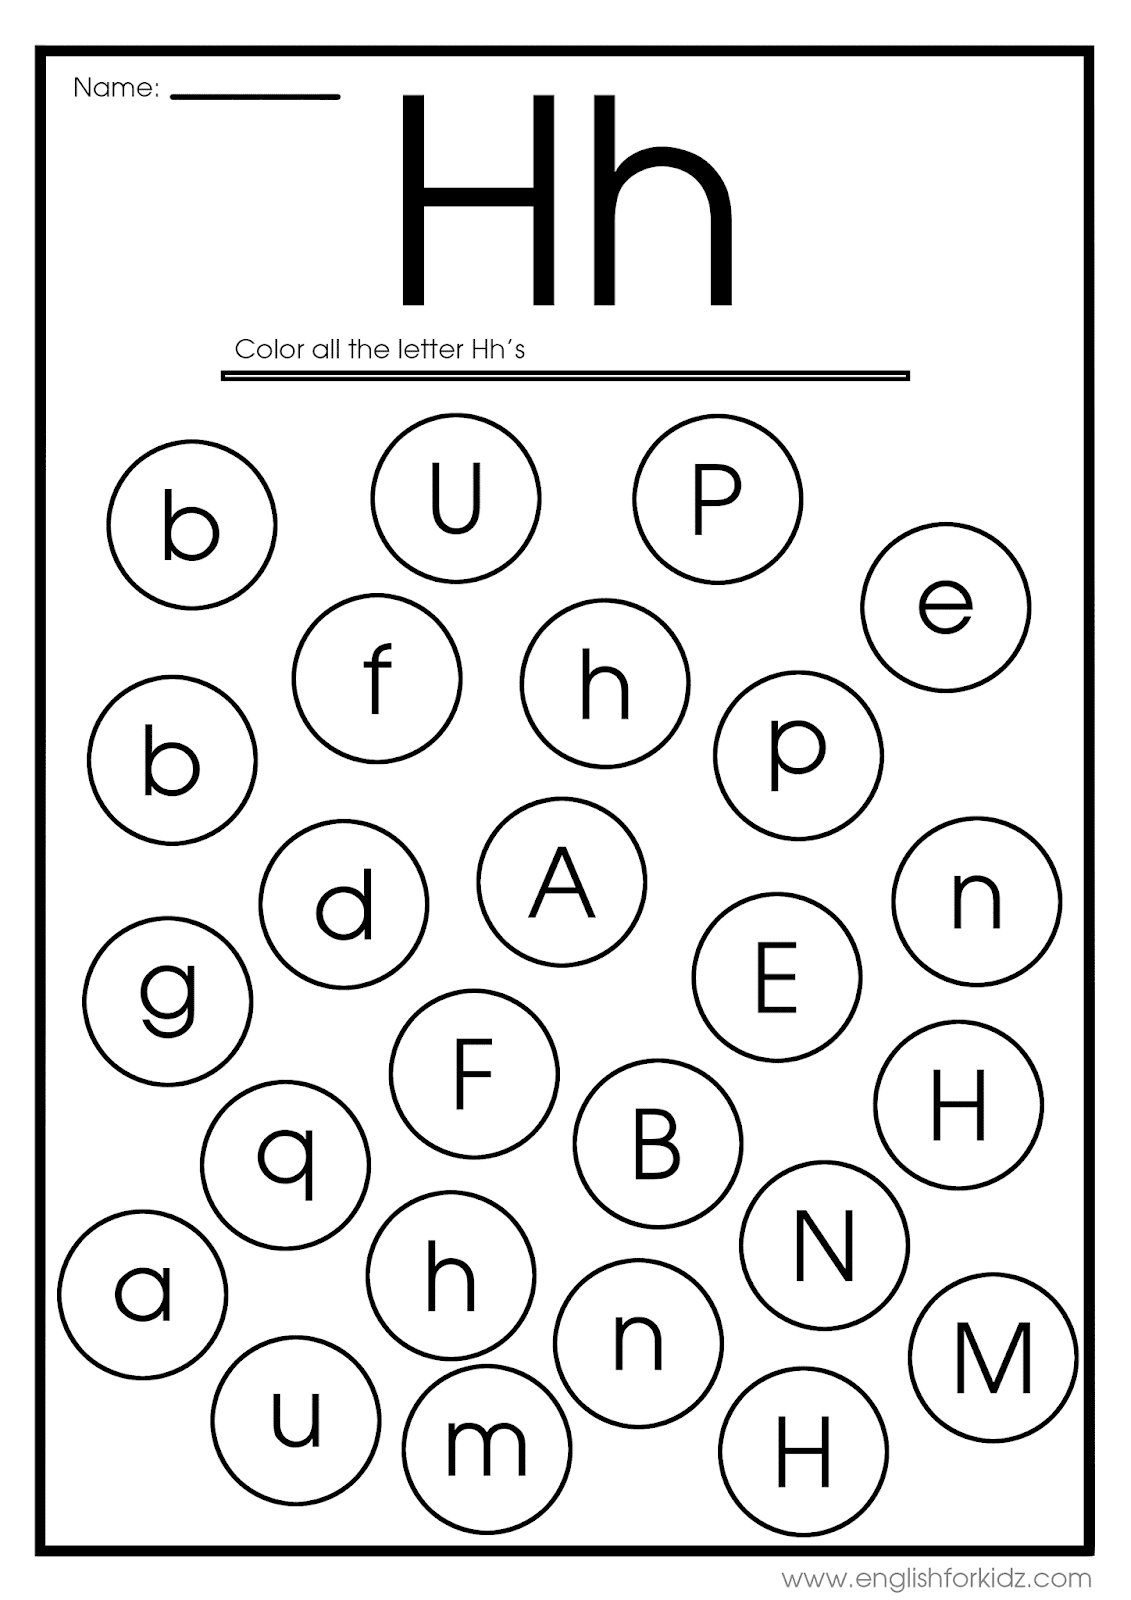 Letter H Worksheets, Flash Cards, Coloring Pages